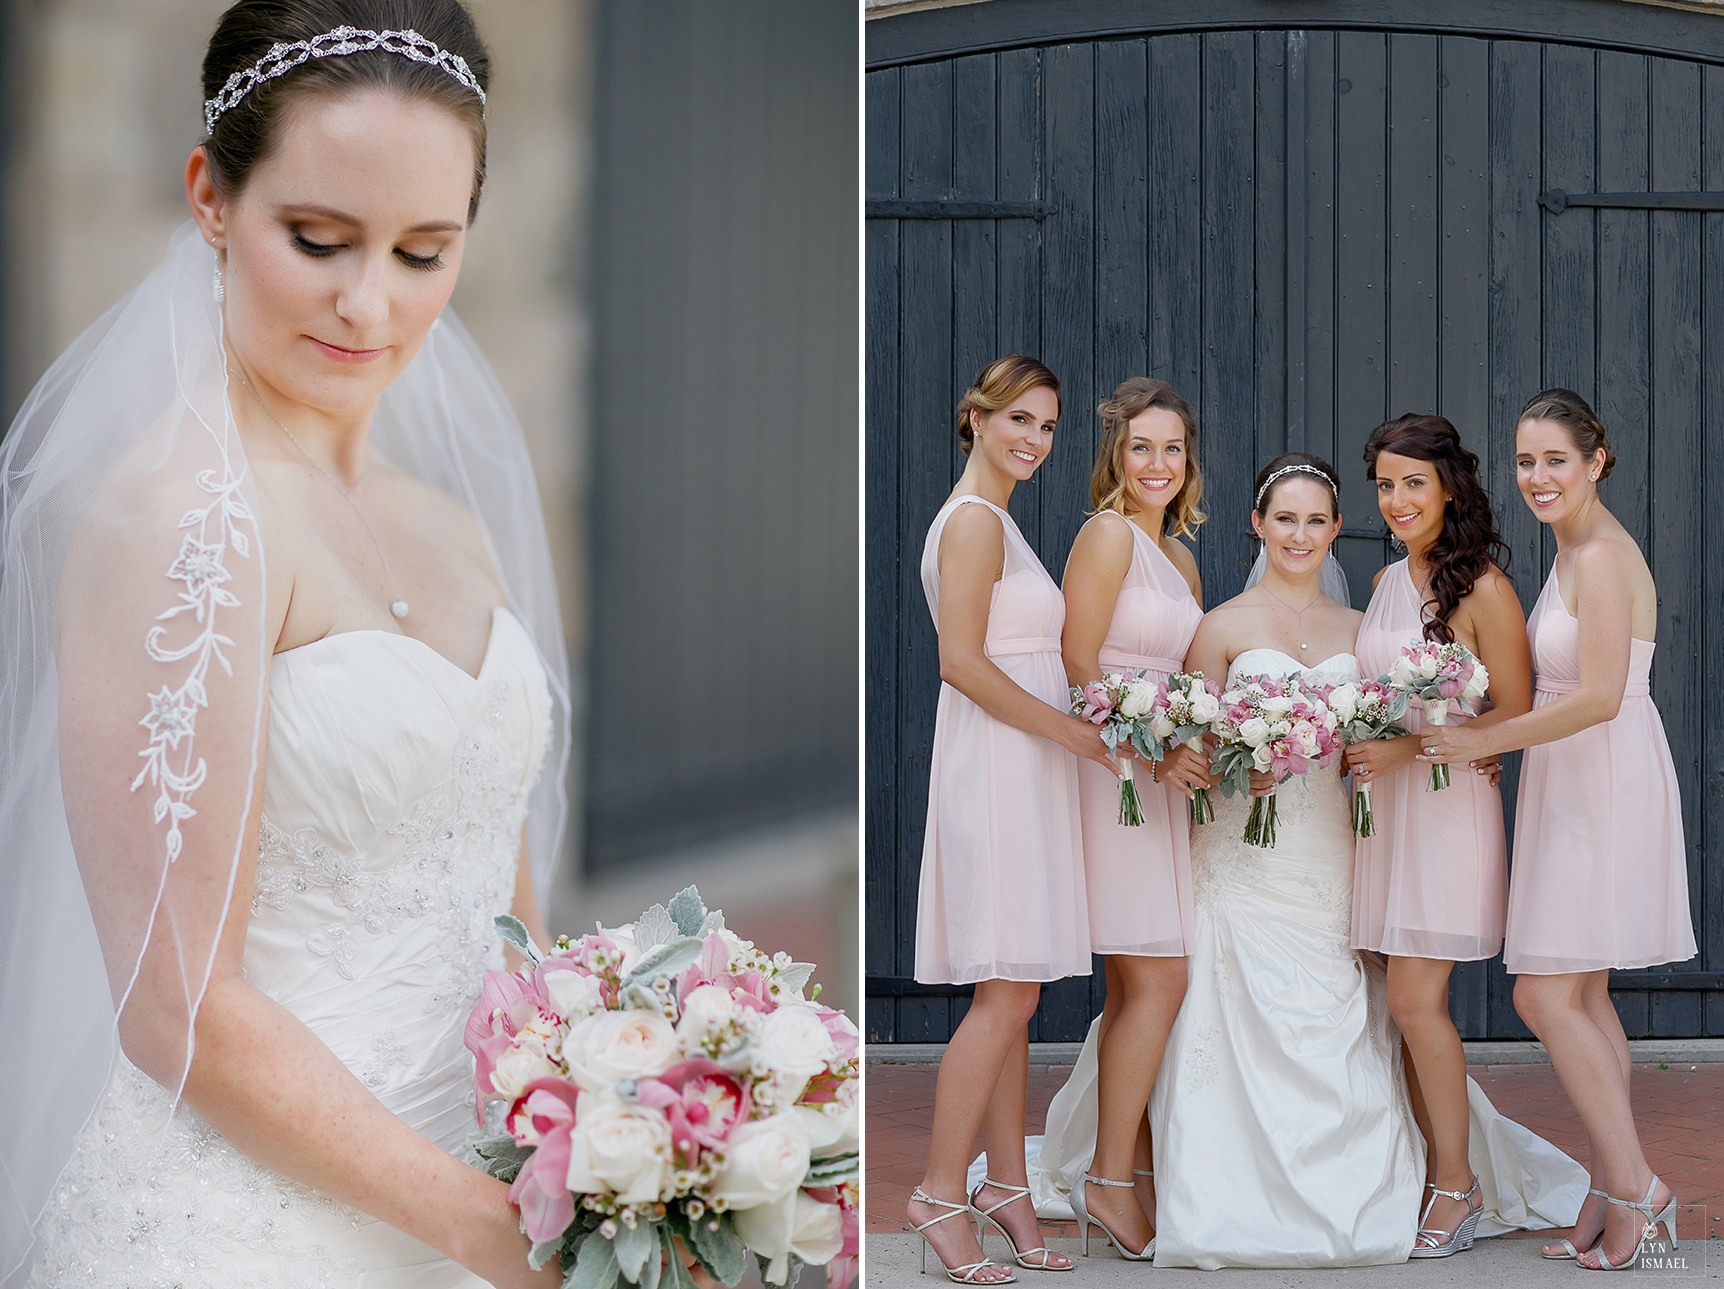 The bride and her bridesmaids in pink dresses at Dundurn Castle in Hamilton